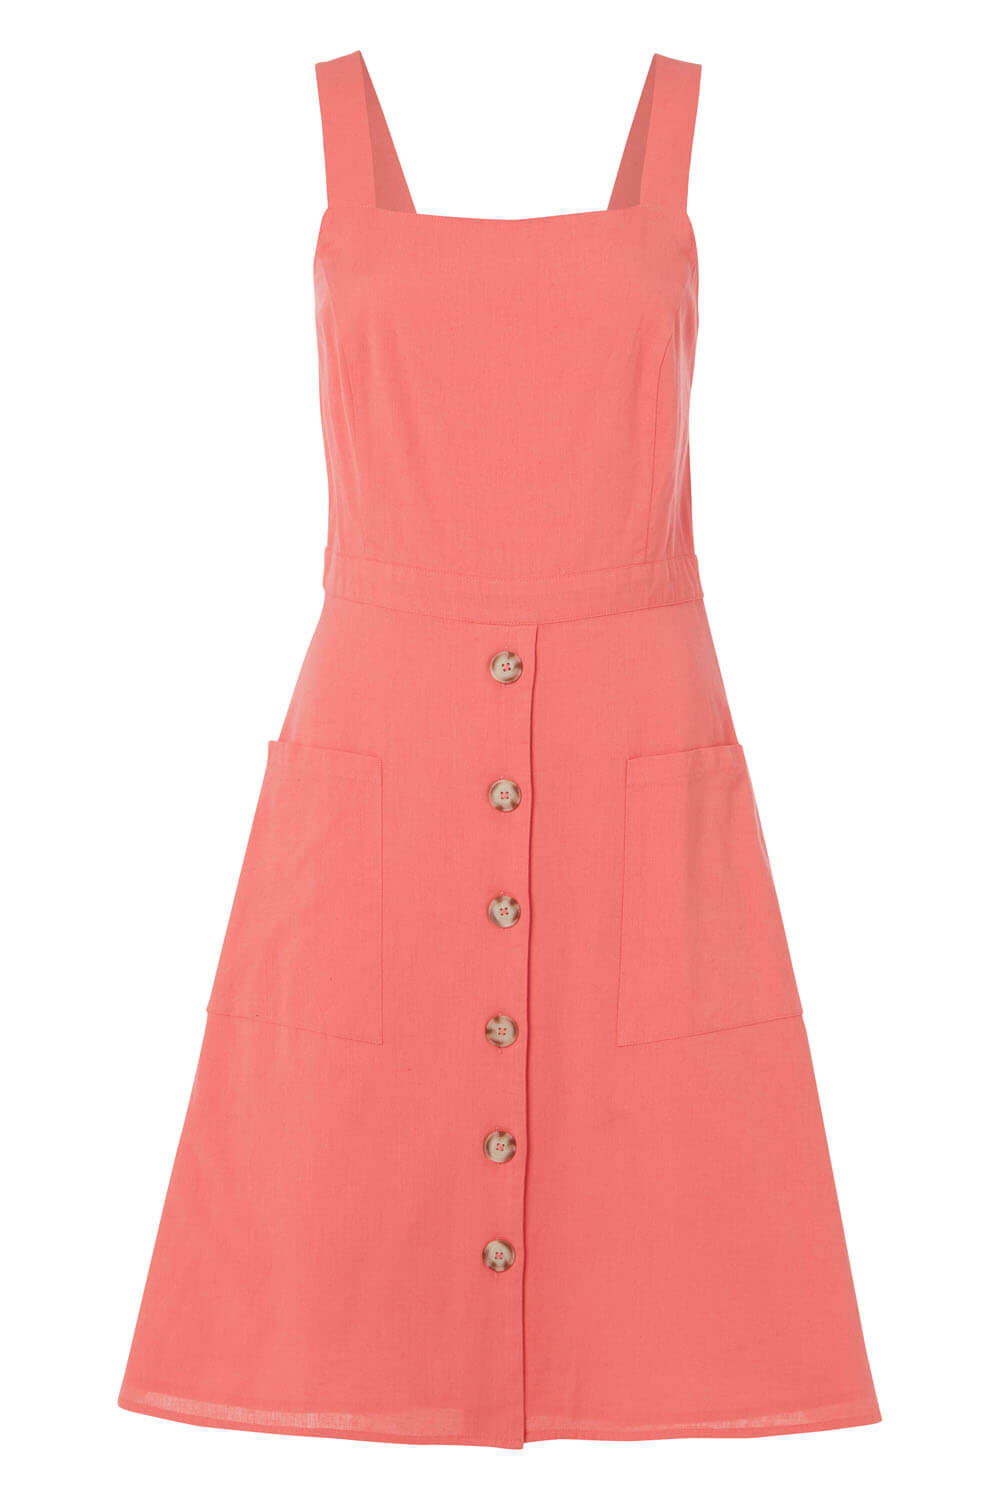 CORAL Fit and Flare Button Dress, Image 5 of 5